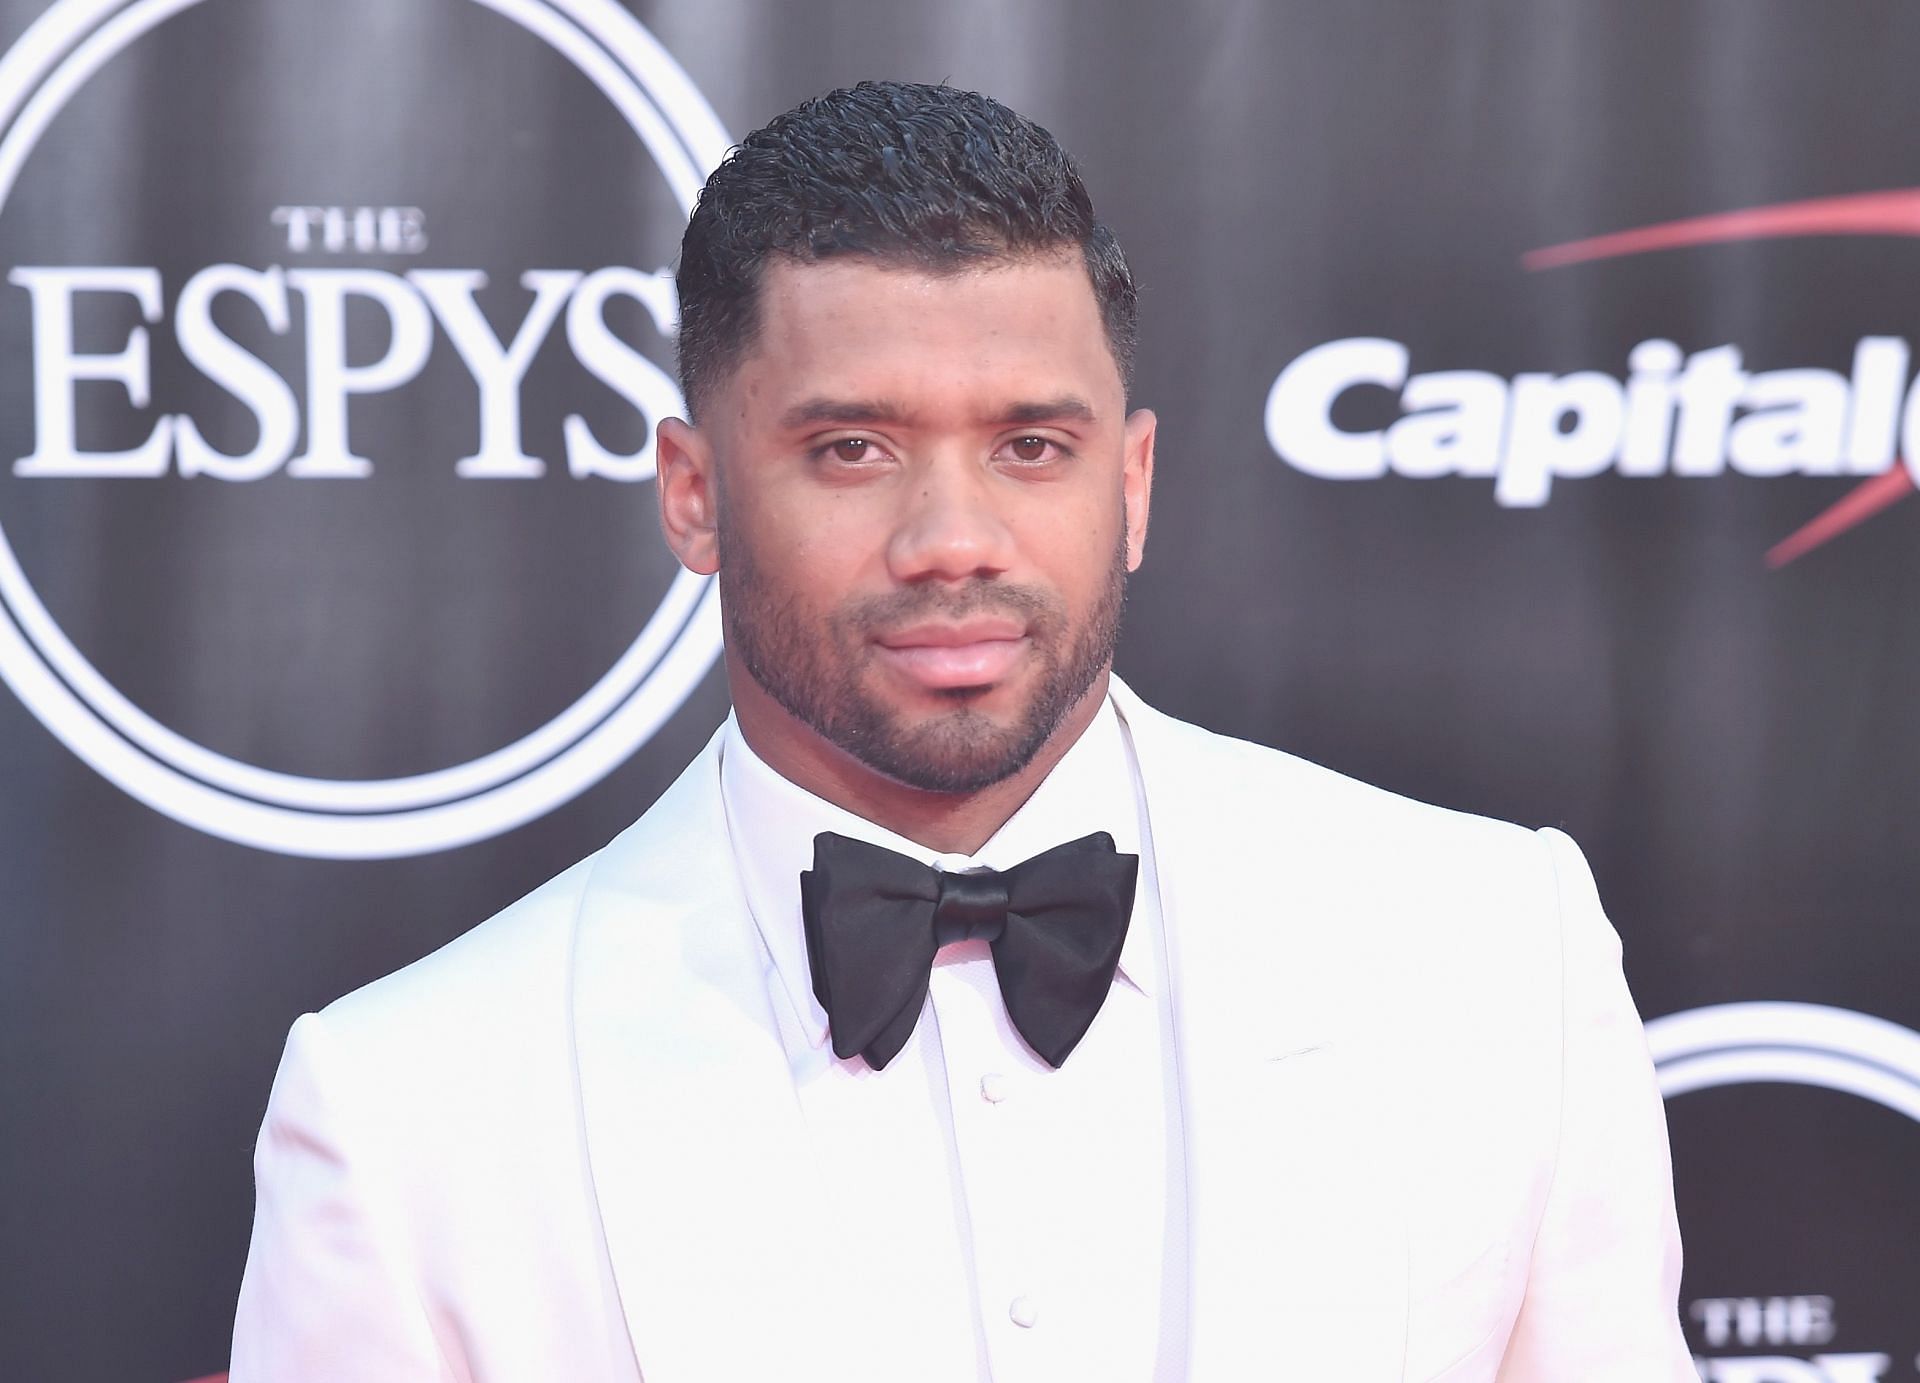 Quarterback Russell Wilson at the ESPYS